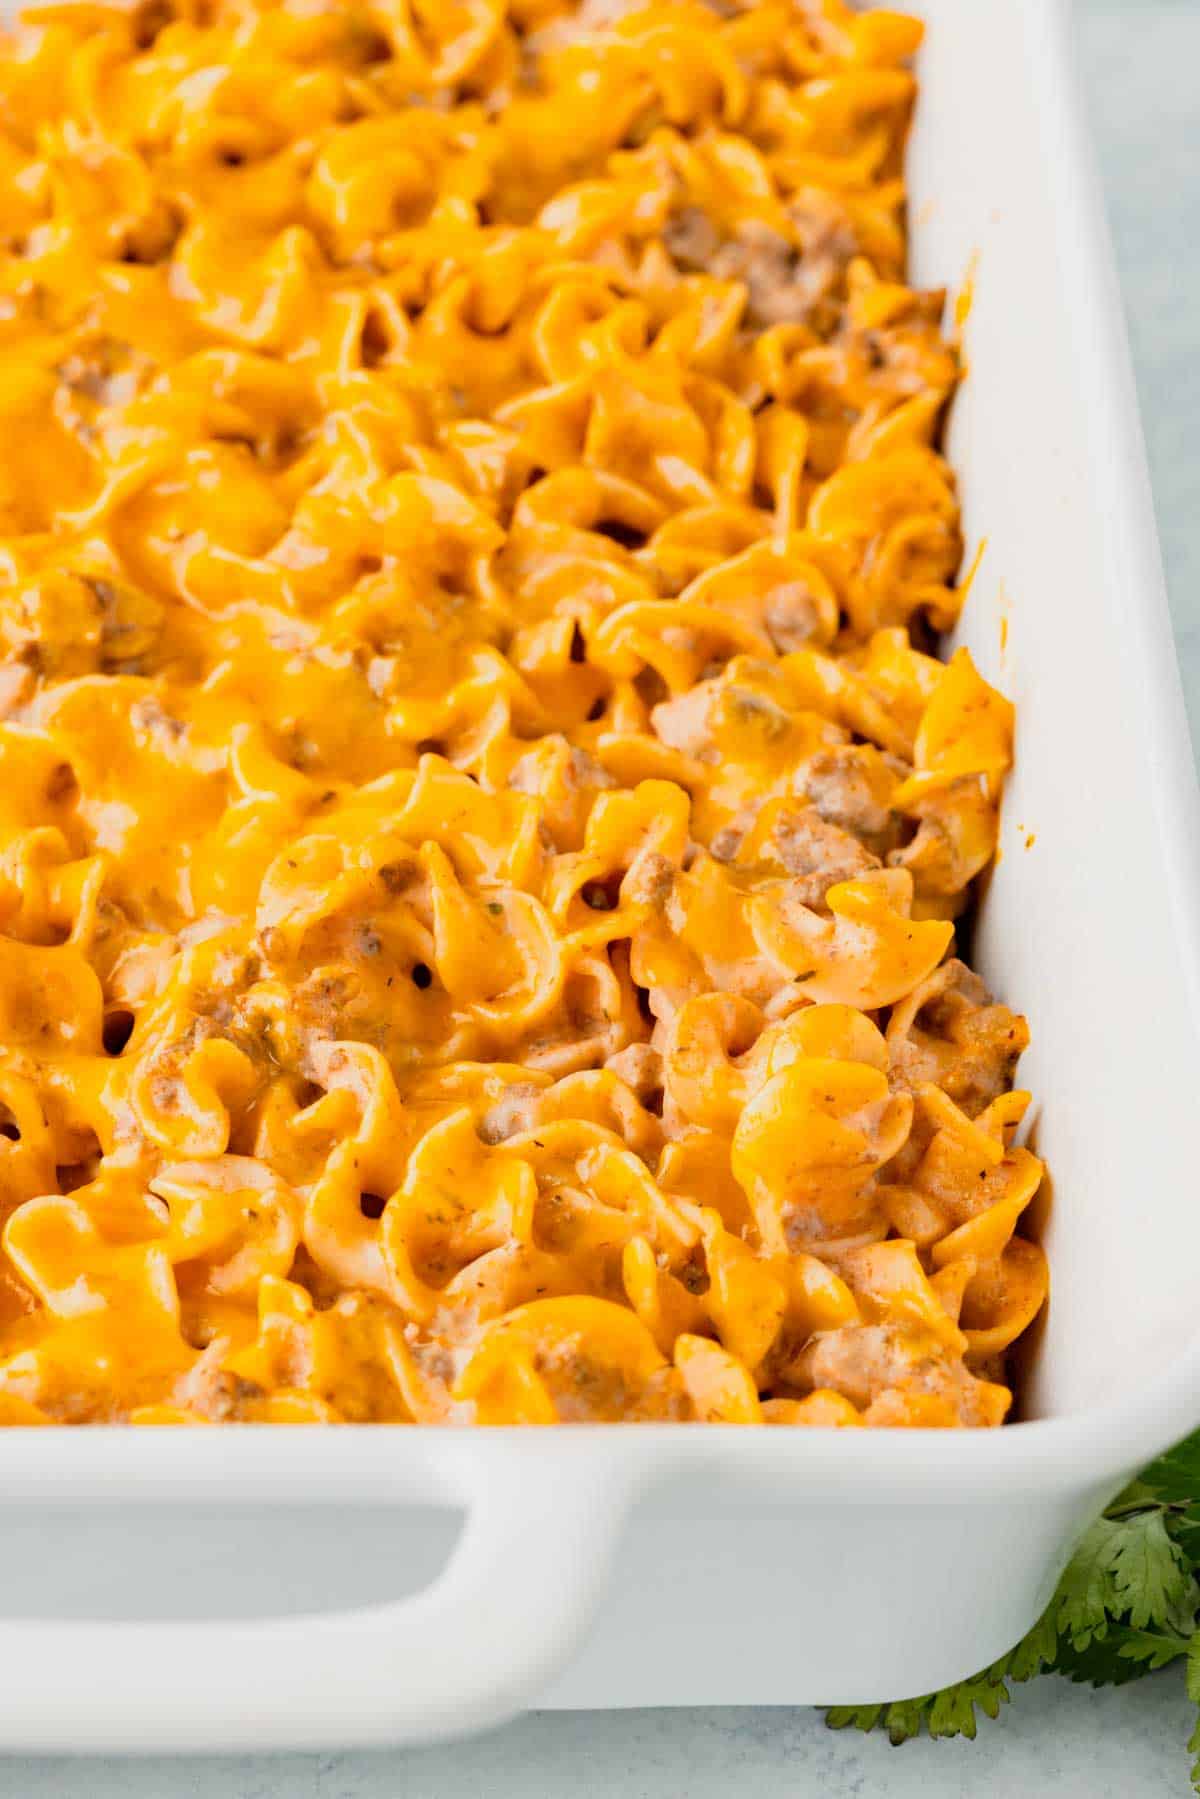 Beef Noodle Casserole is a hearty dish loaded with ground beef, egg noodles, cheddar cheese, sour cream and cream of mushroom soup.